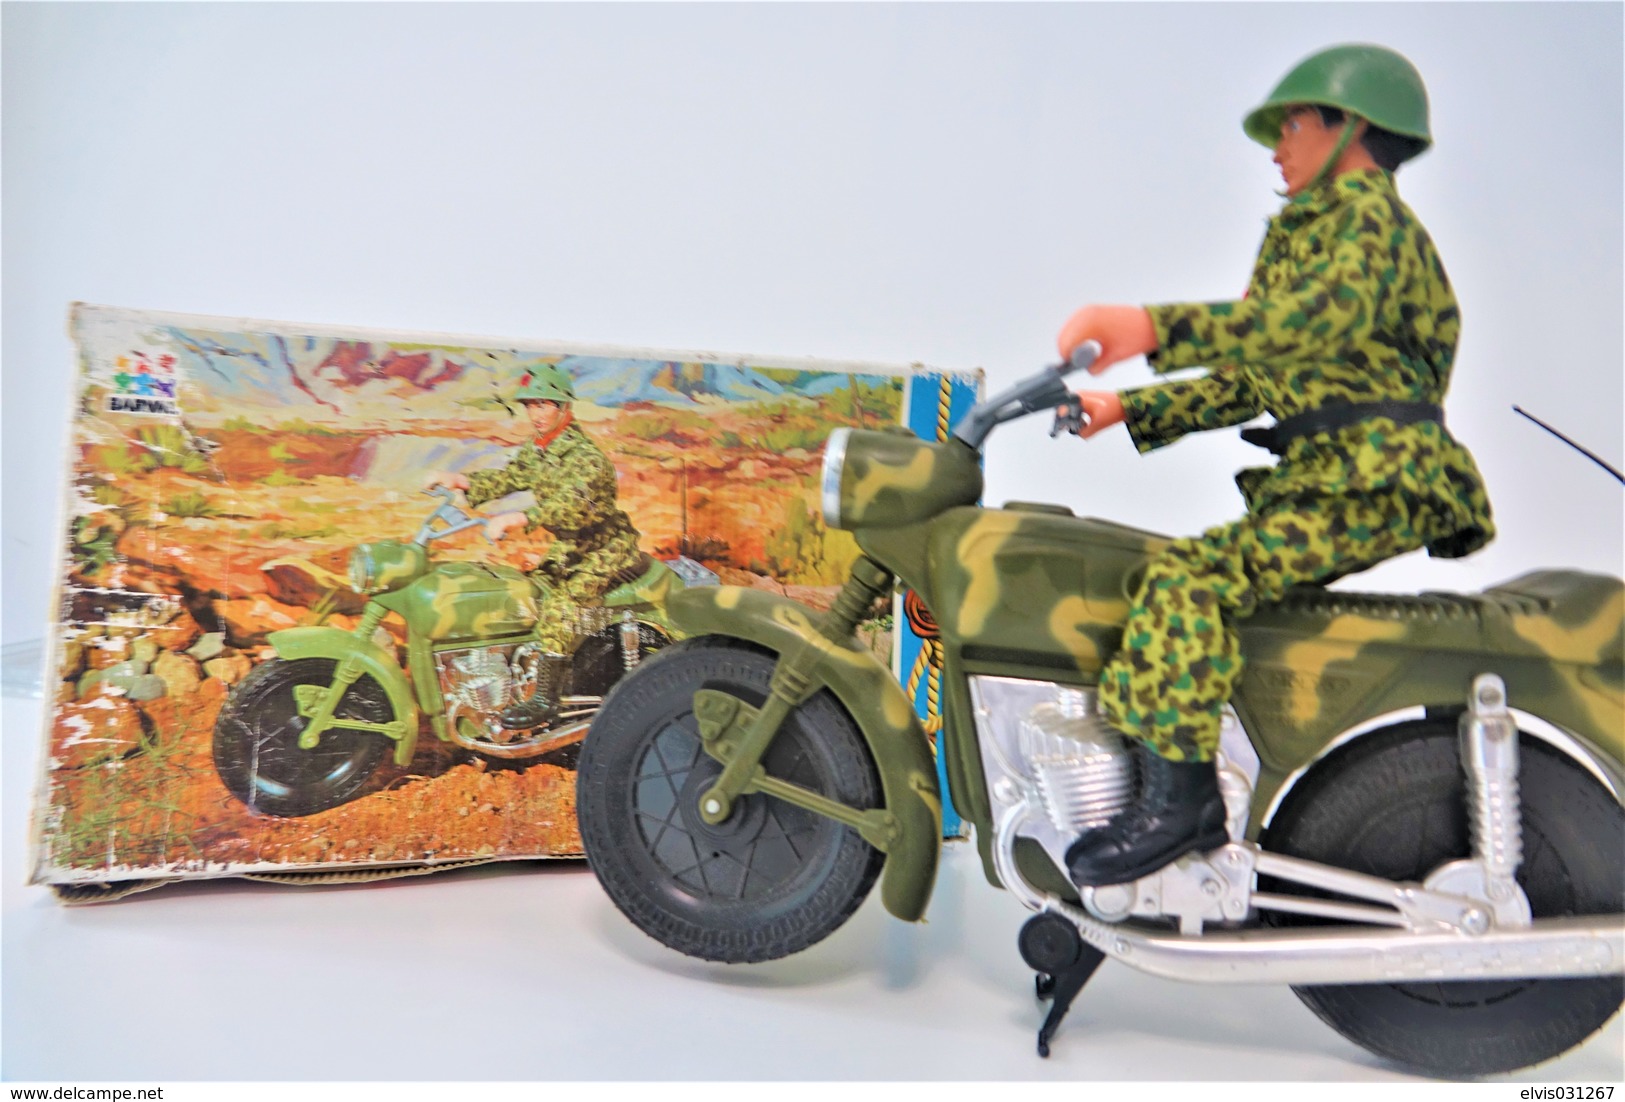 Vintage ACTION MAN MOLTO : DISPATCH RIDER WITH ORIGINAL BOX - REF 561 - made in spain  - motorcycle - GI JOE